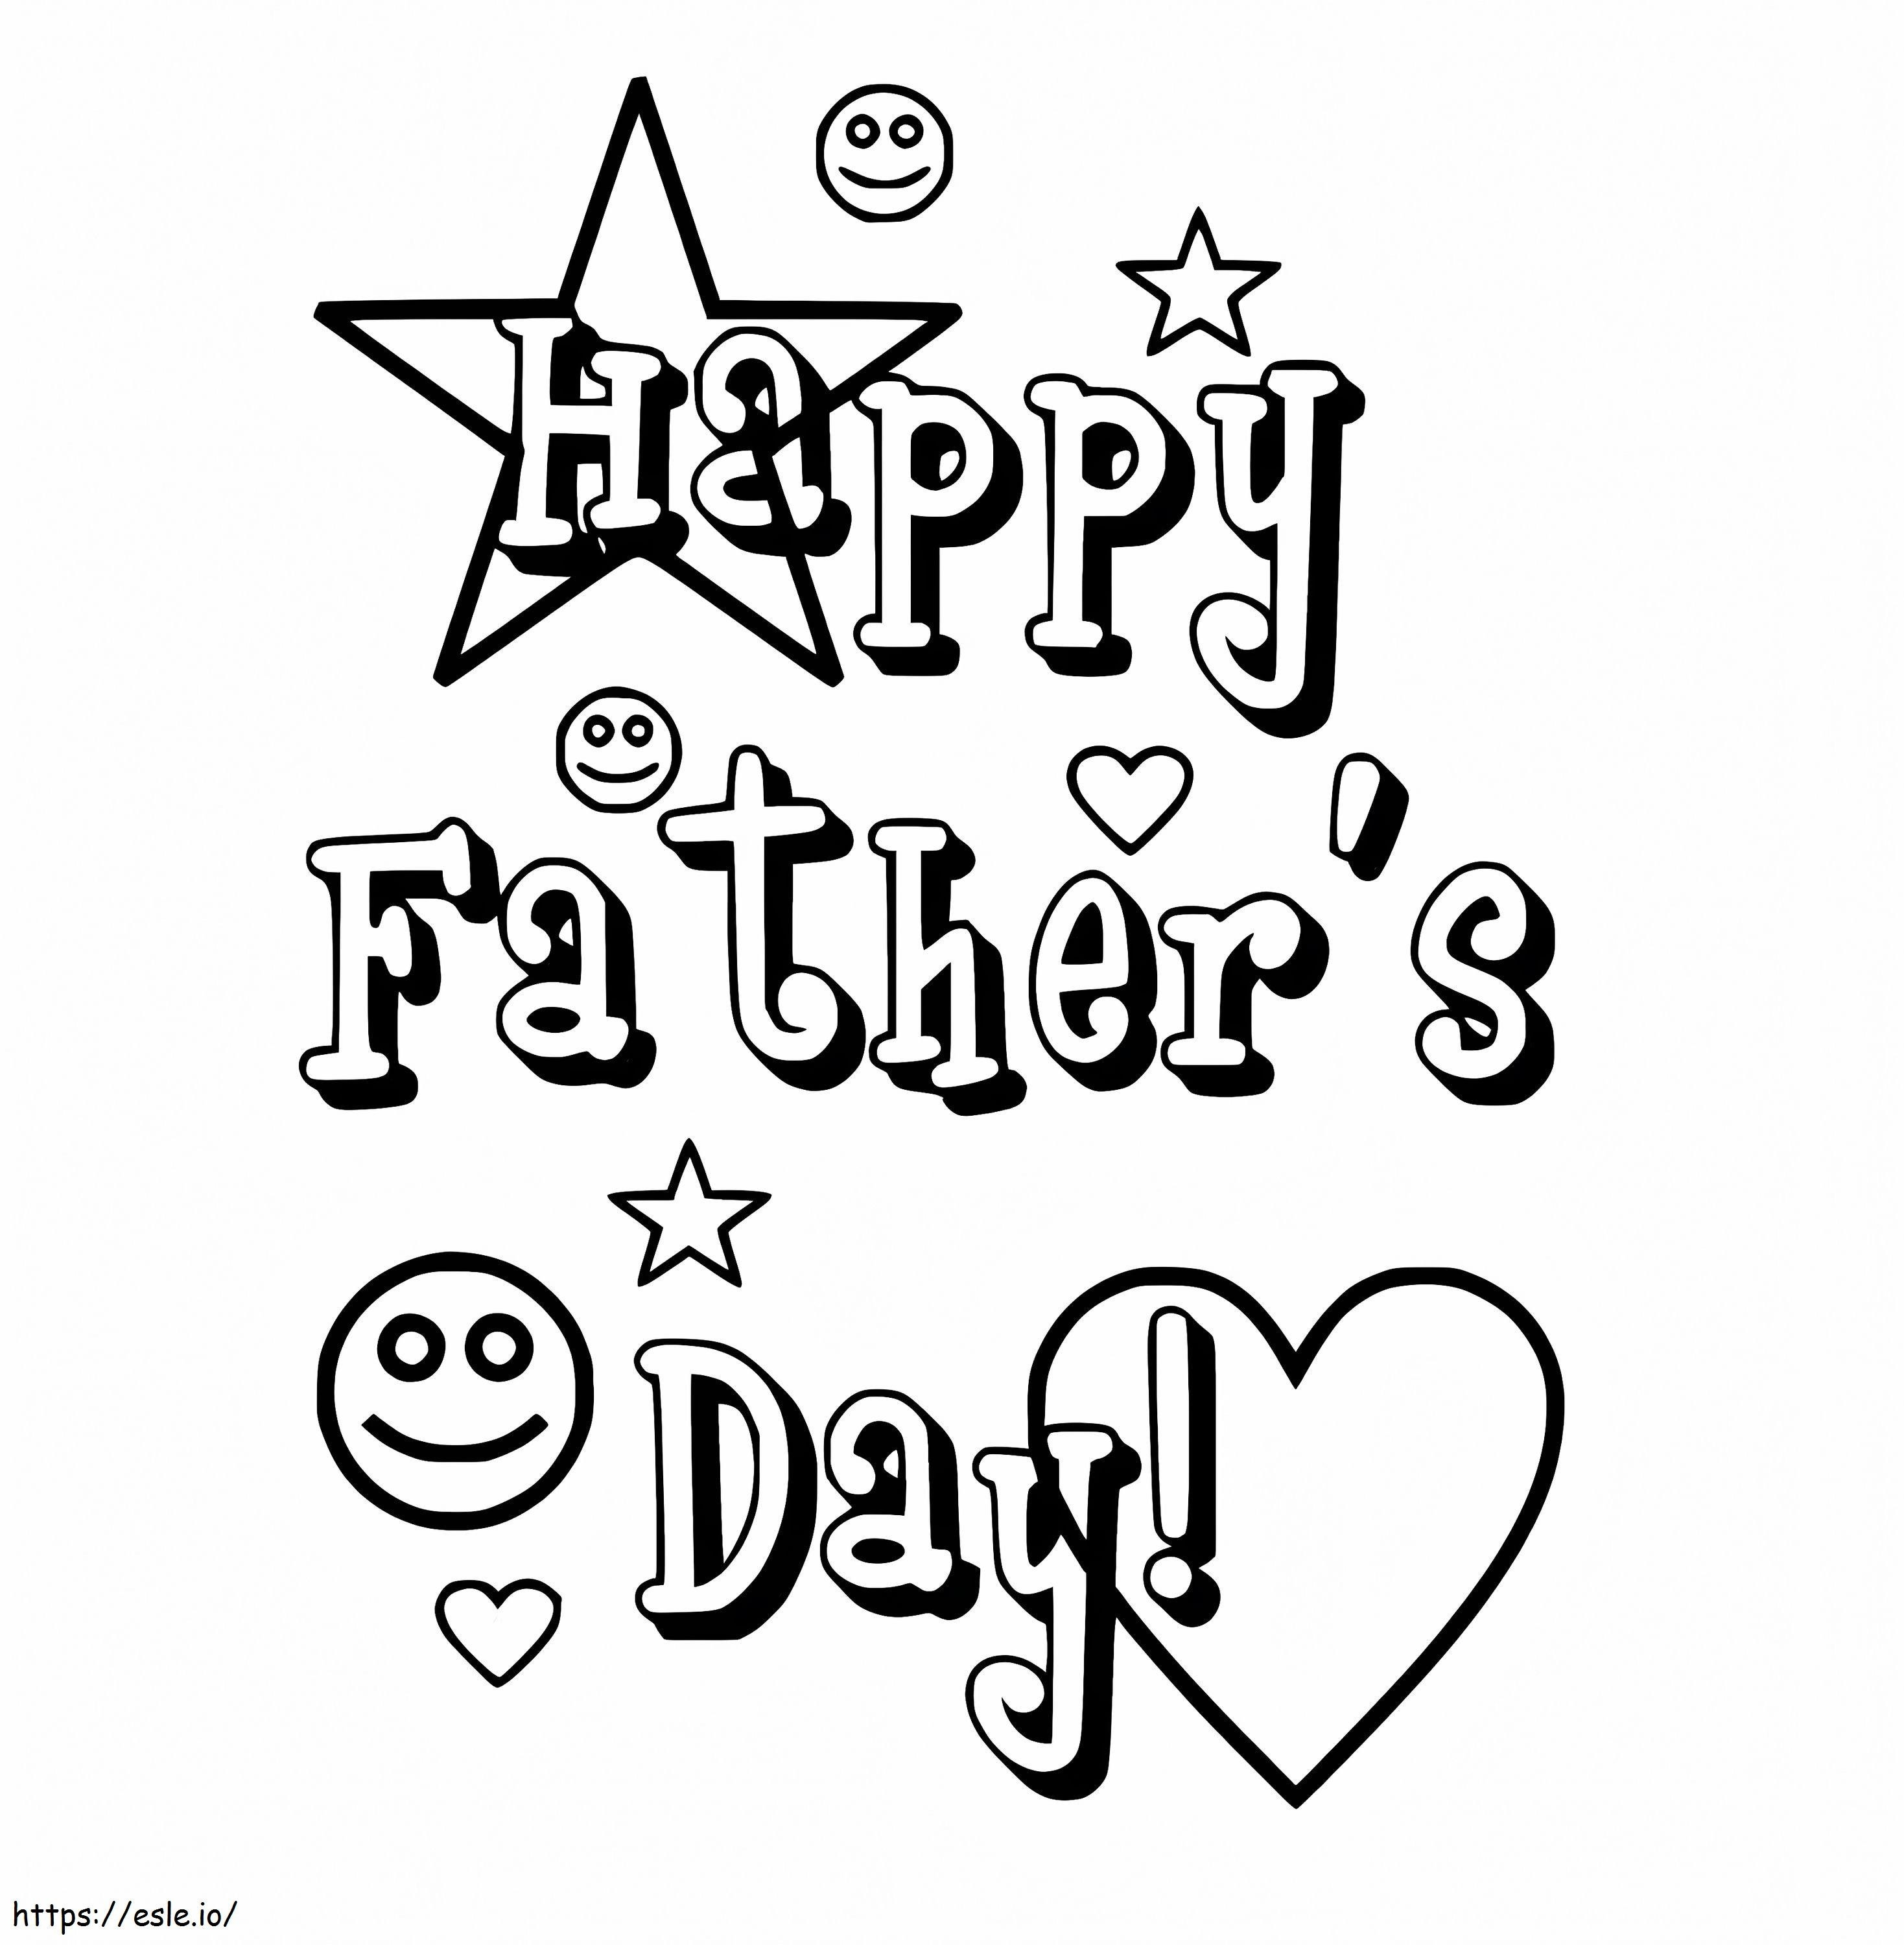 Happy Fathers Day 10 coloring page